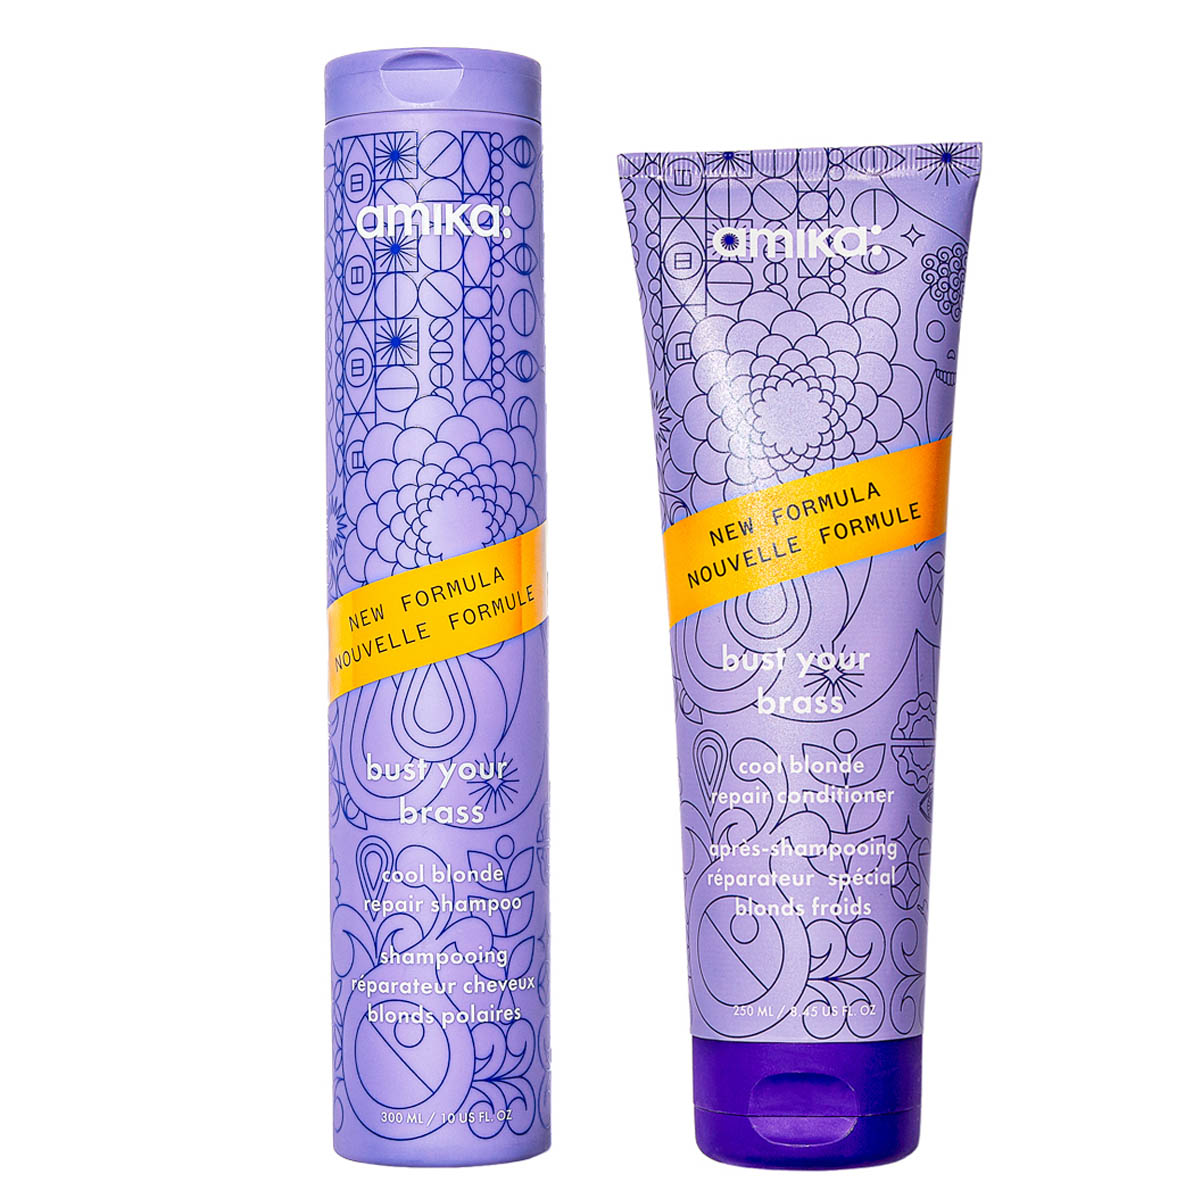 Amika Bust Your Brass Cool Blonde Shampoo + Conditioner DUO - Hairsale.se